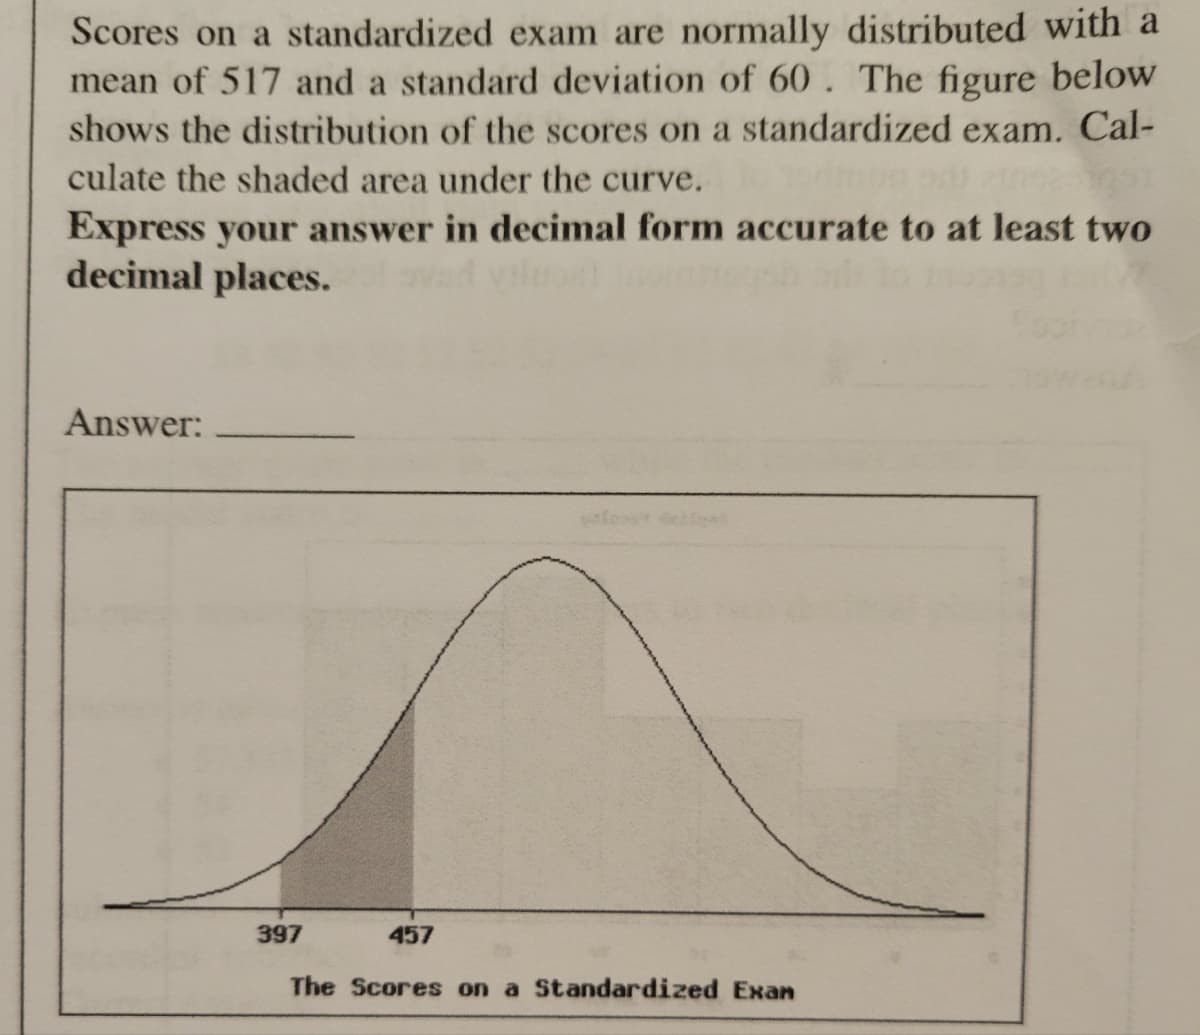 Scores on a standardized exam are normally distributed with a
mean of 517 and a standard deviation of 60. The figure below
shows the distribution of the scores on a standardized exam. Cal-
culate the shaded area under the curve.
Express your answer in decimal form accurate to at least two
decimal places.
Answer:
397
457
The Scores on a Standardized Exan